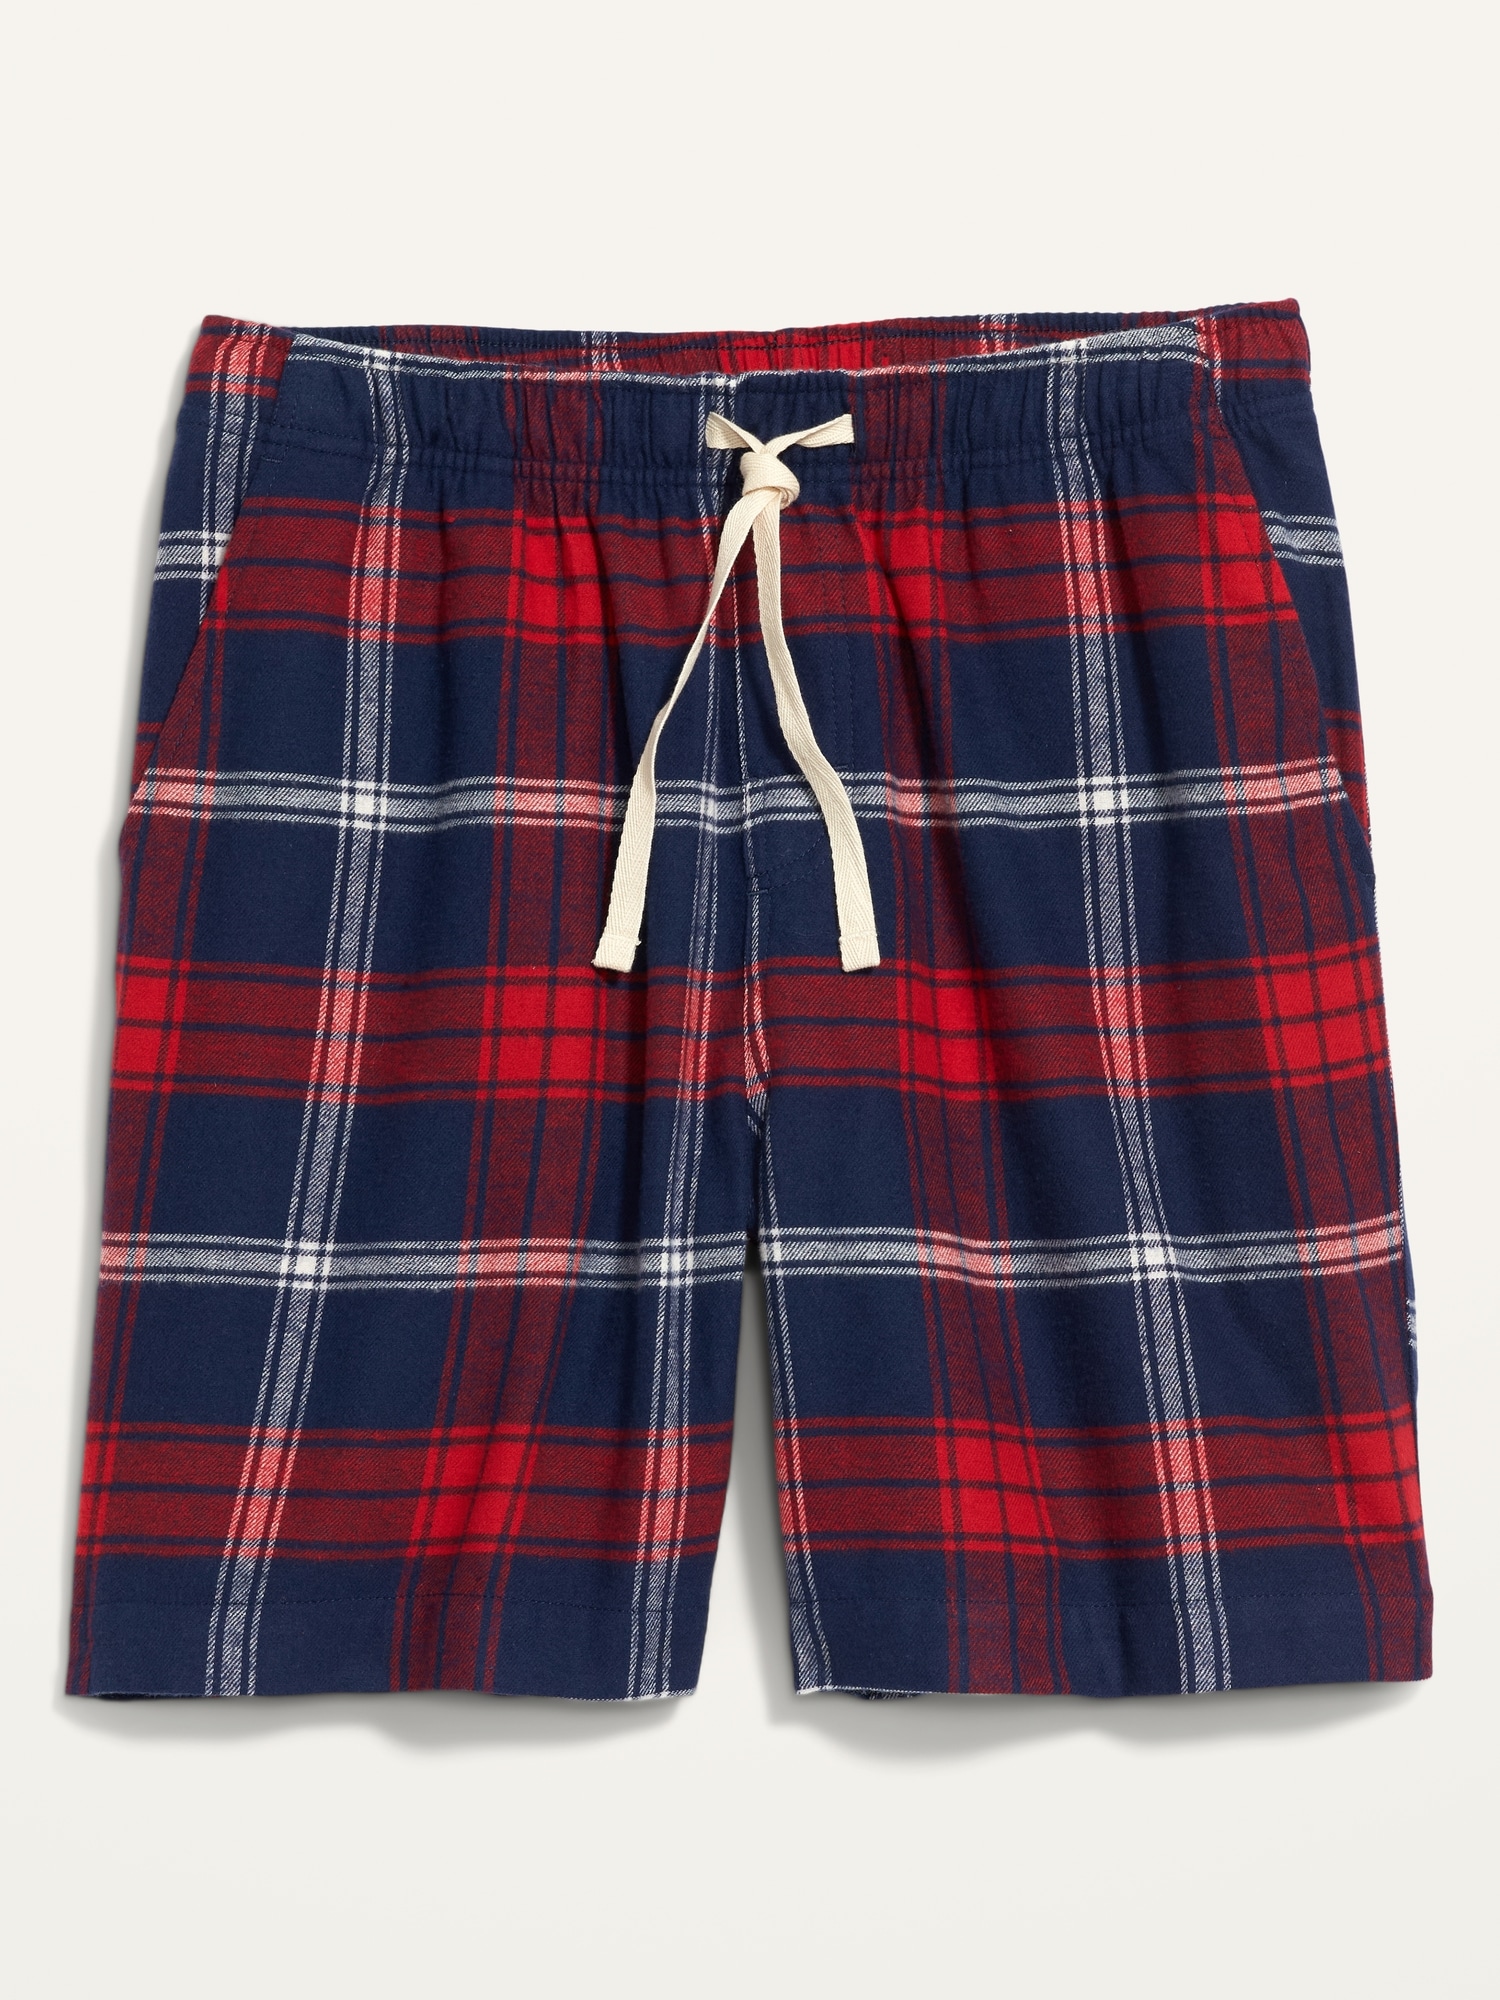 Matching Plaid Flannel Pajama Shorts for Men -- 7.5-inch inseam | Old Navy